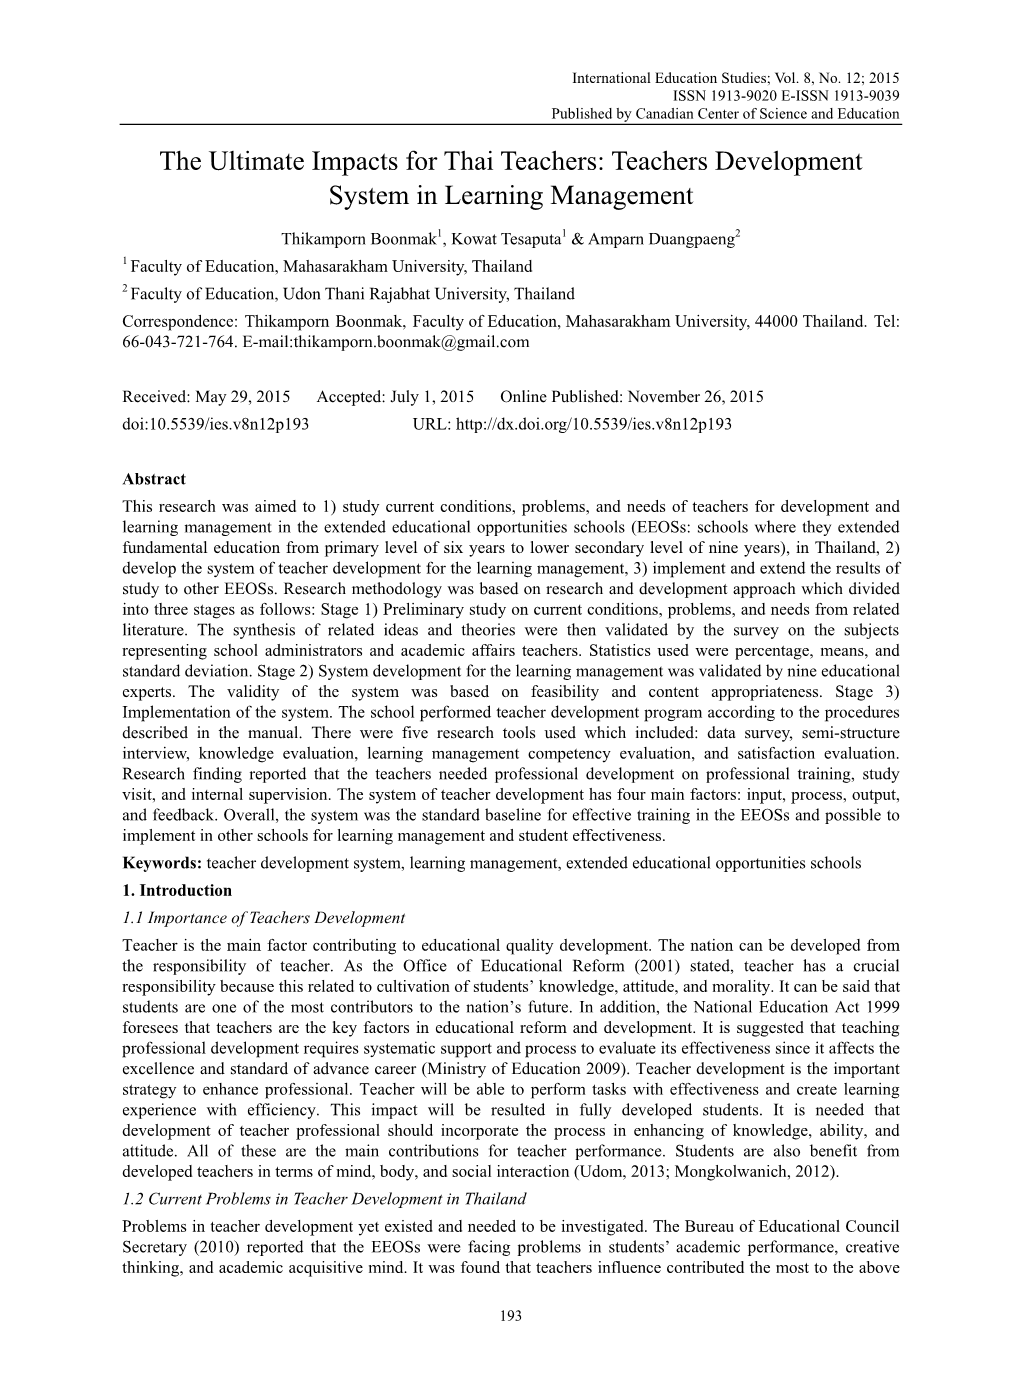 The Ultimate Impacts for Thai Teachers: Teachers Development System in Learning Management